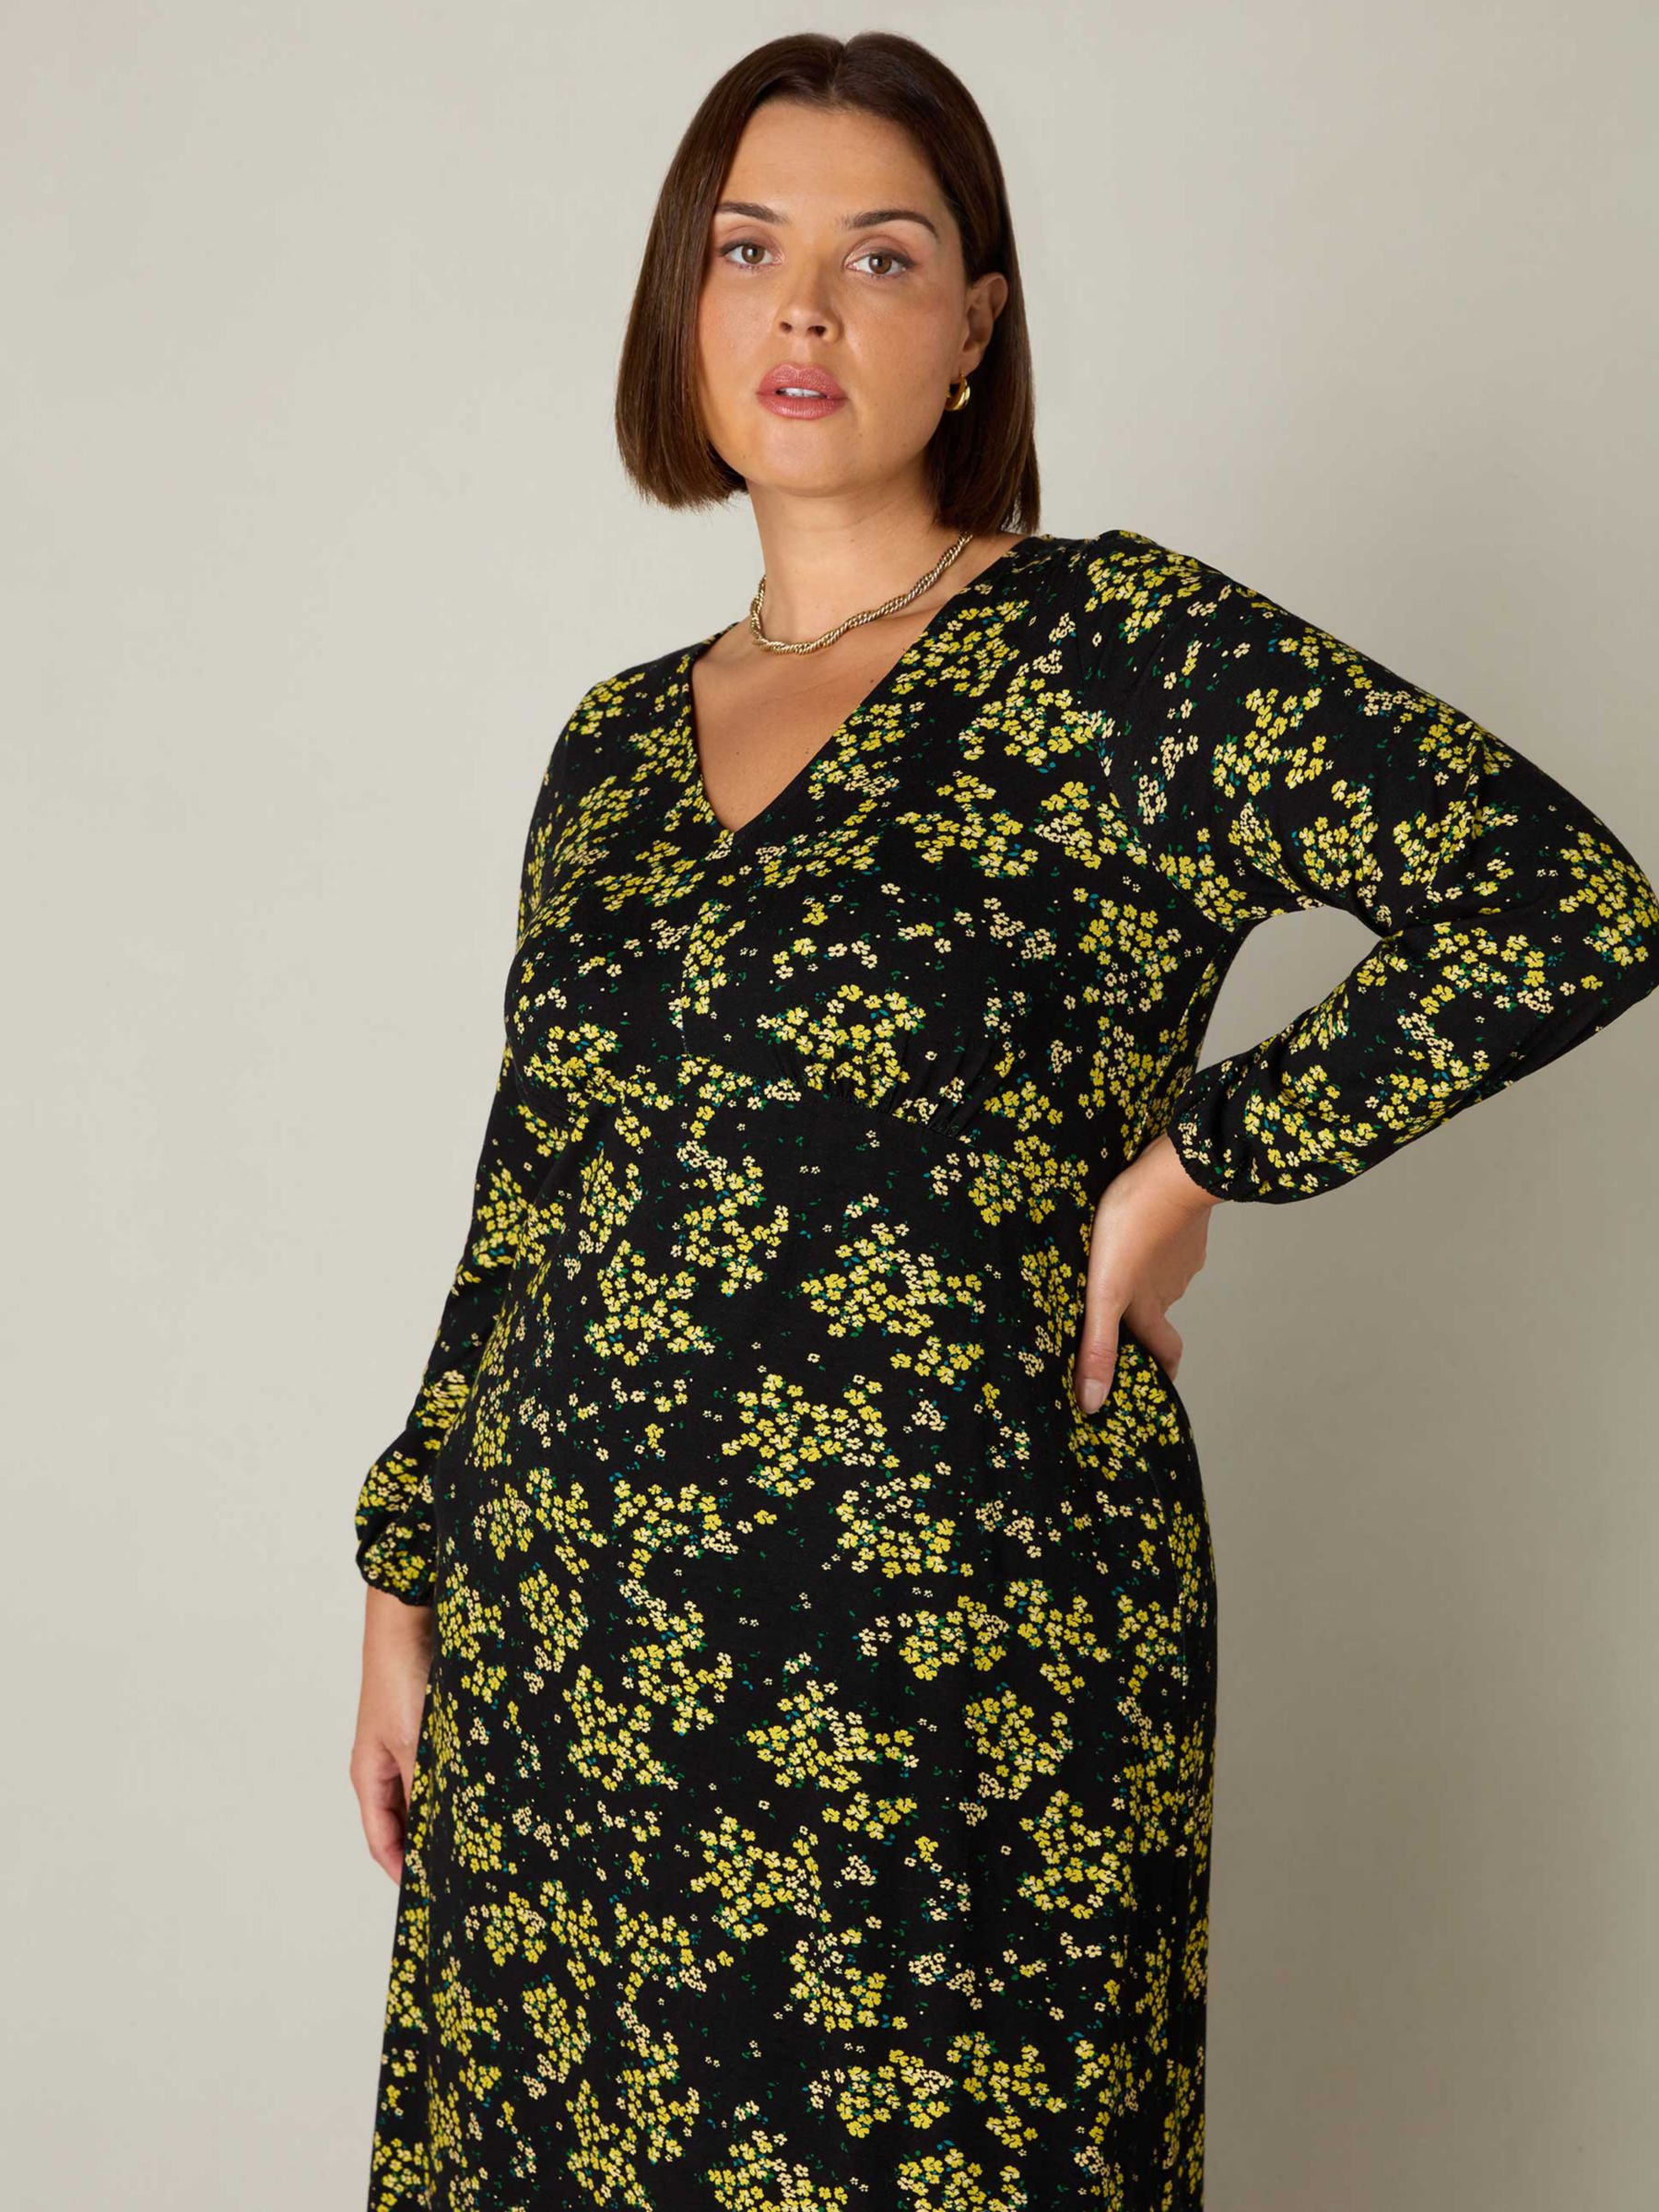 Buy Live Unlimited Curve Ditsy Floral Print Gathered Midi Dress, Yellow/Black Online at johnlewis.com